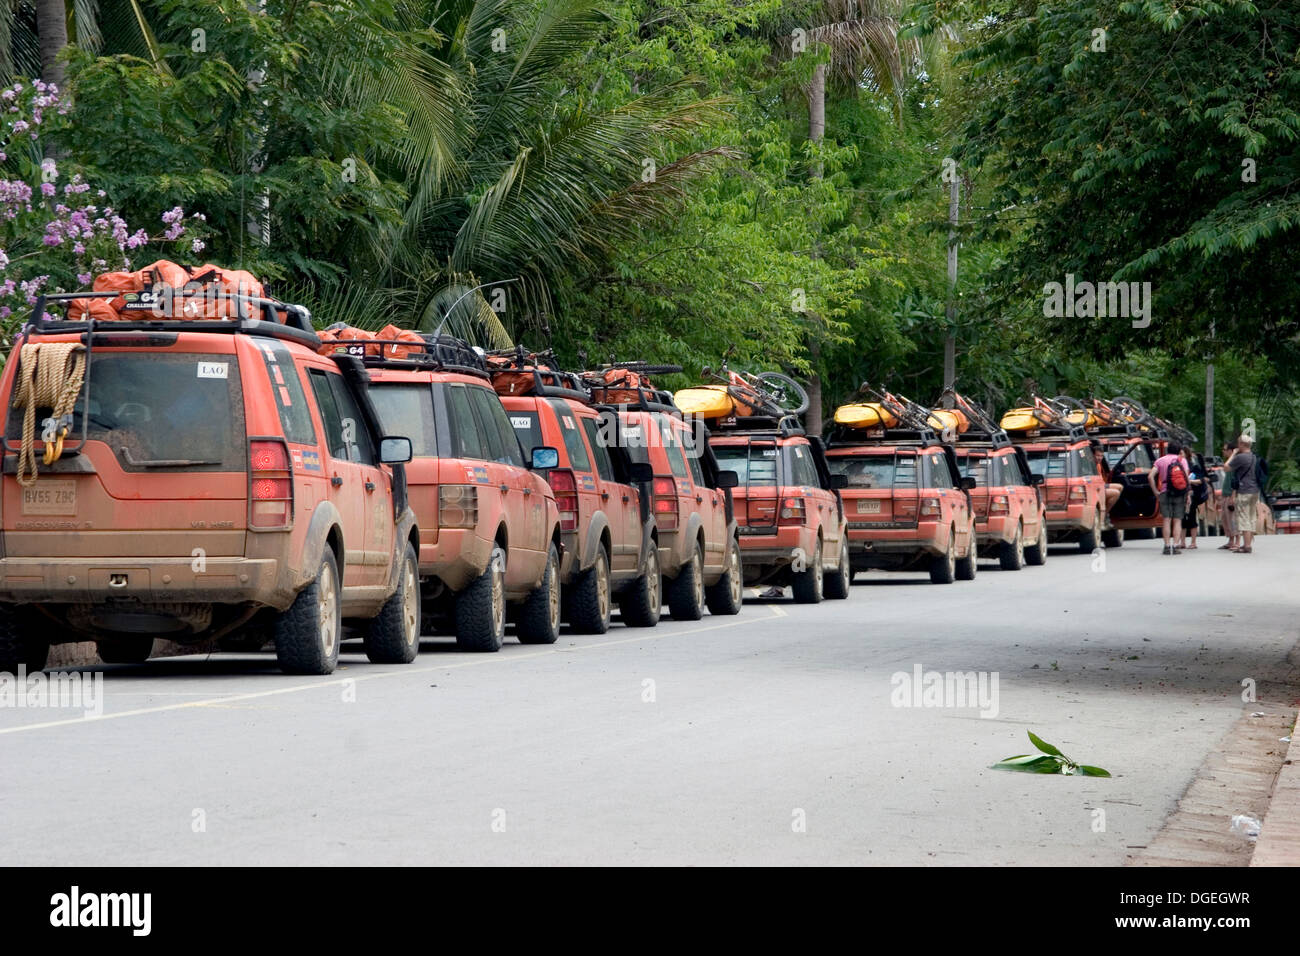 Vehicles taking part in the Land Rover G4 Challenge are parked on a city street in Luang Prabang, Laos. Stock Photo